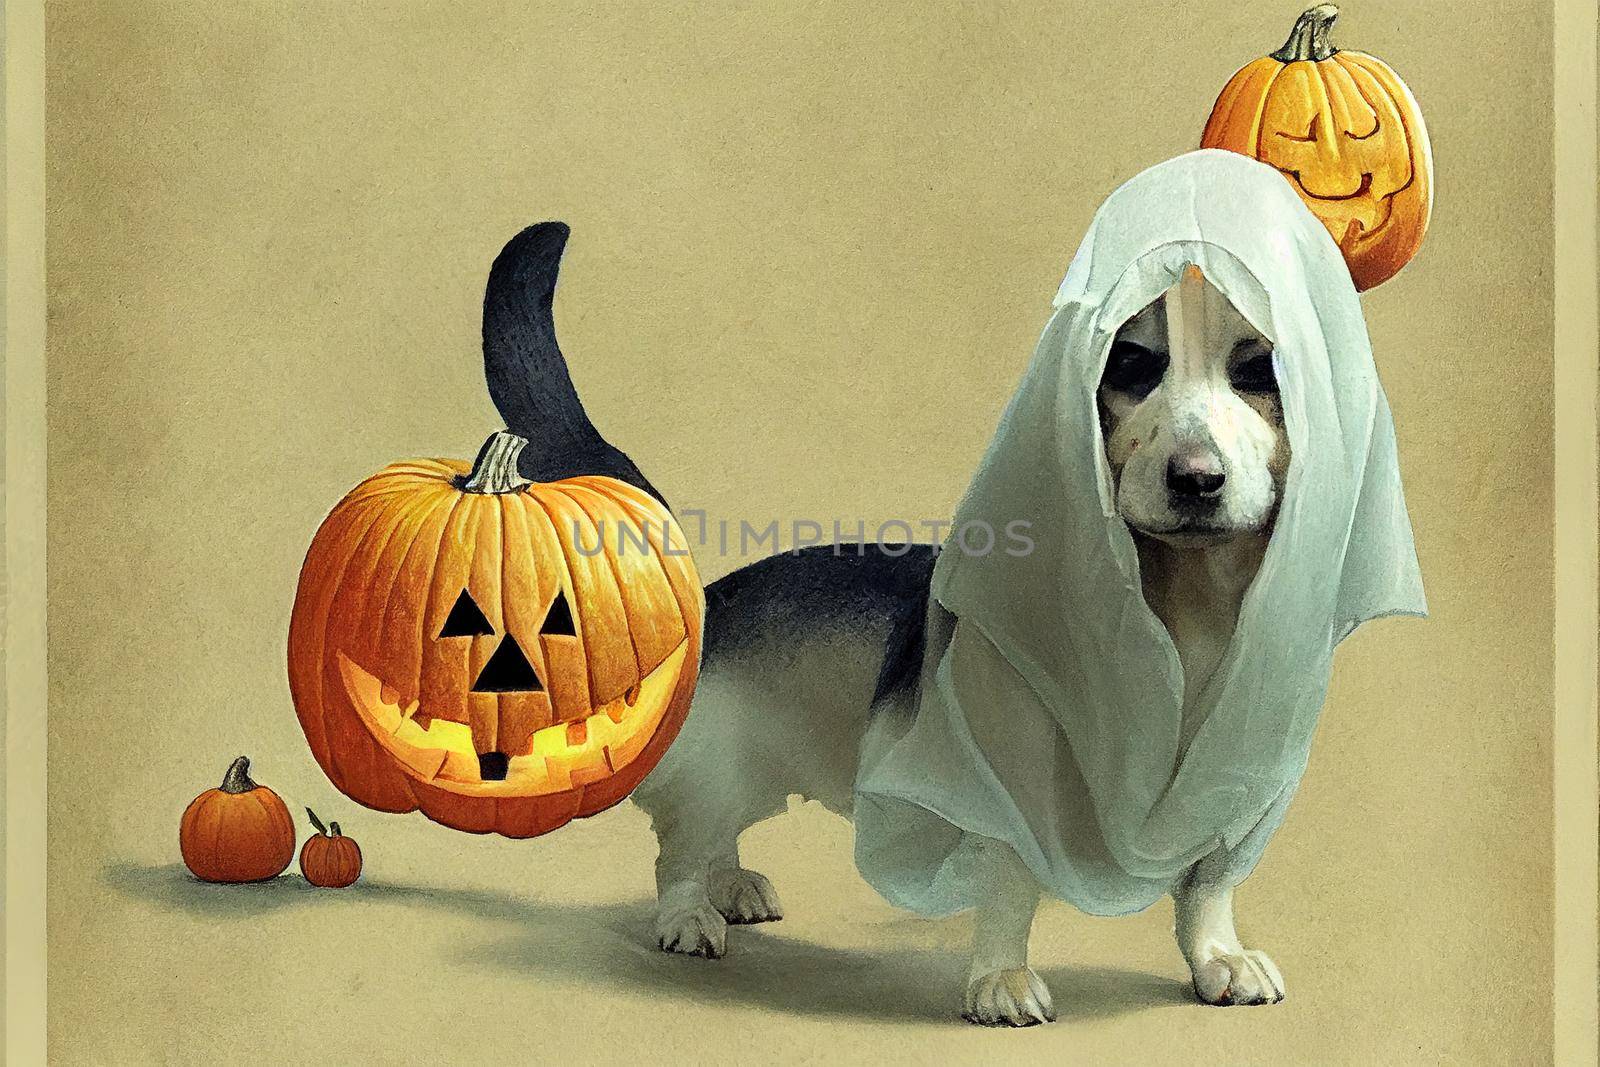 dog in a ghost costume holding a pumpkin in mouth painting, illustration, drawing v3